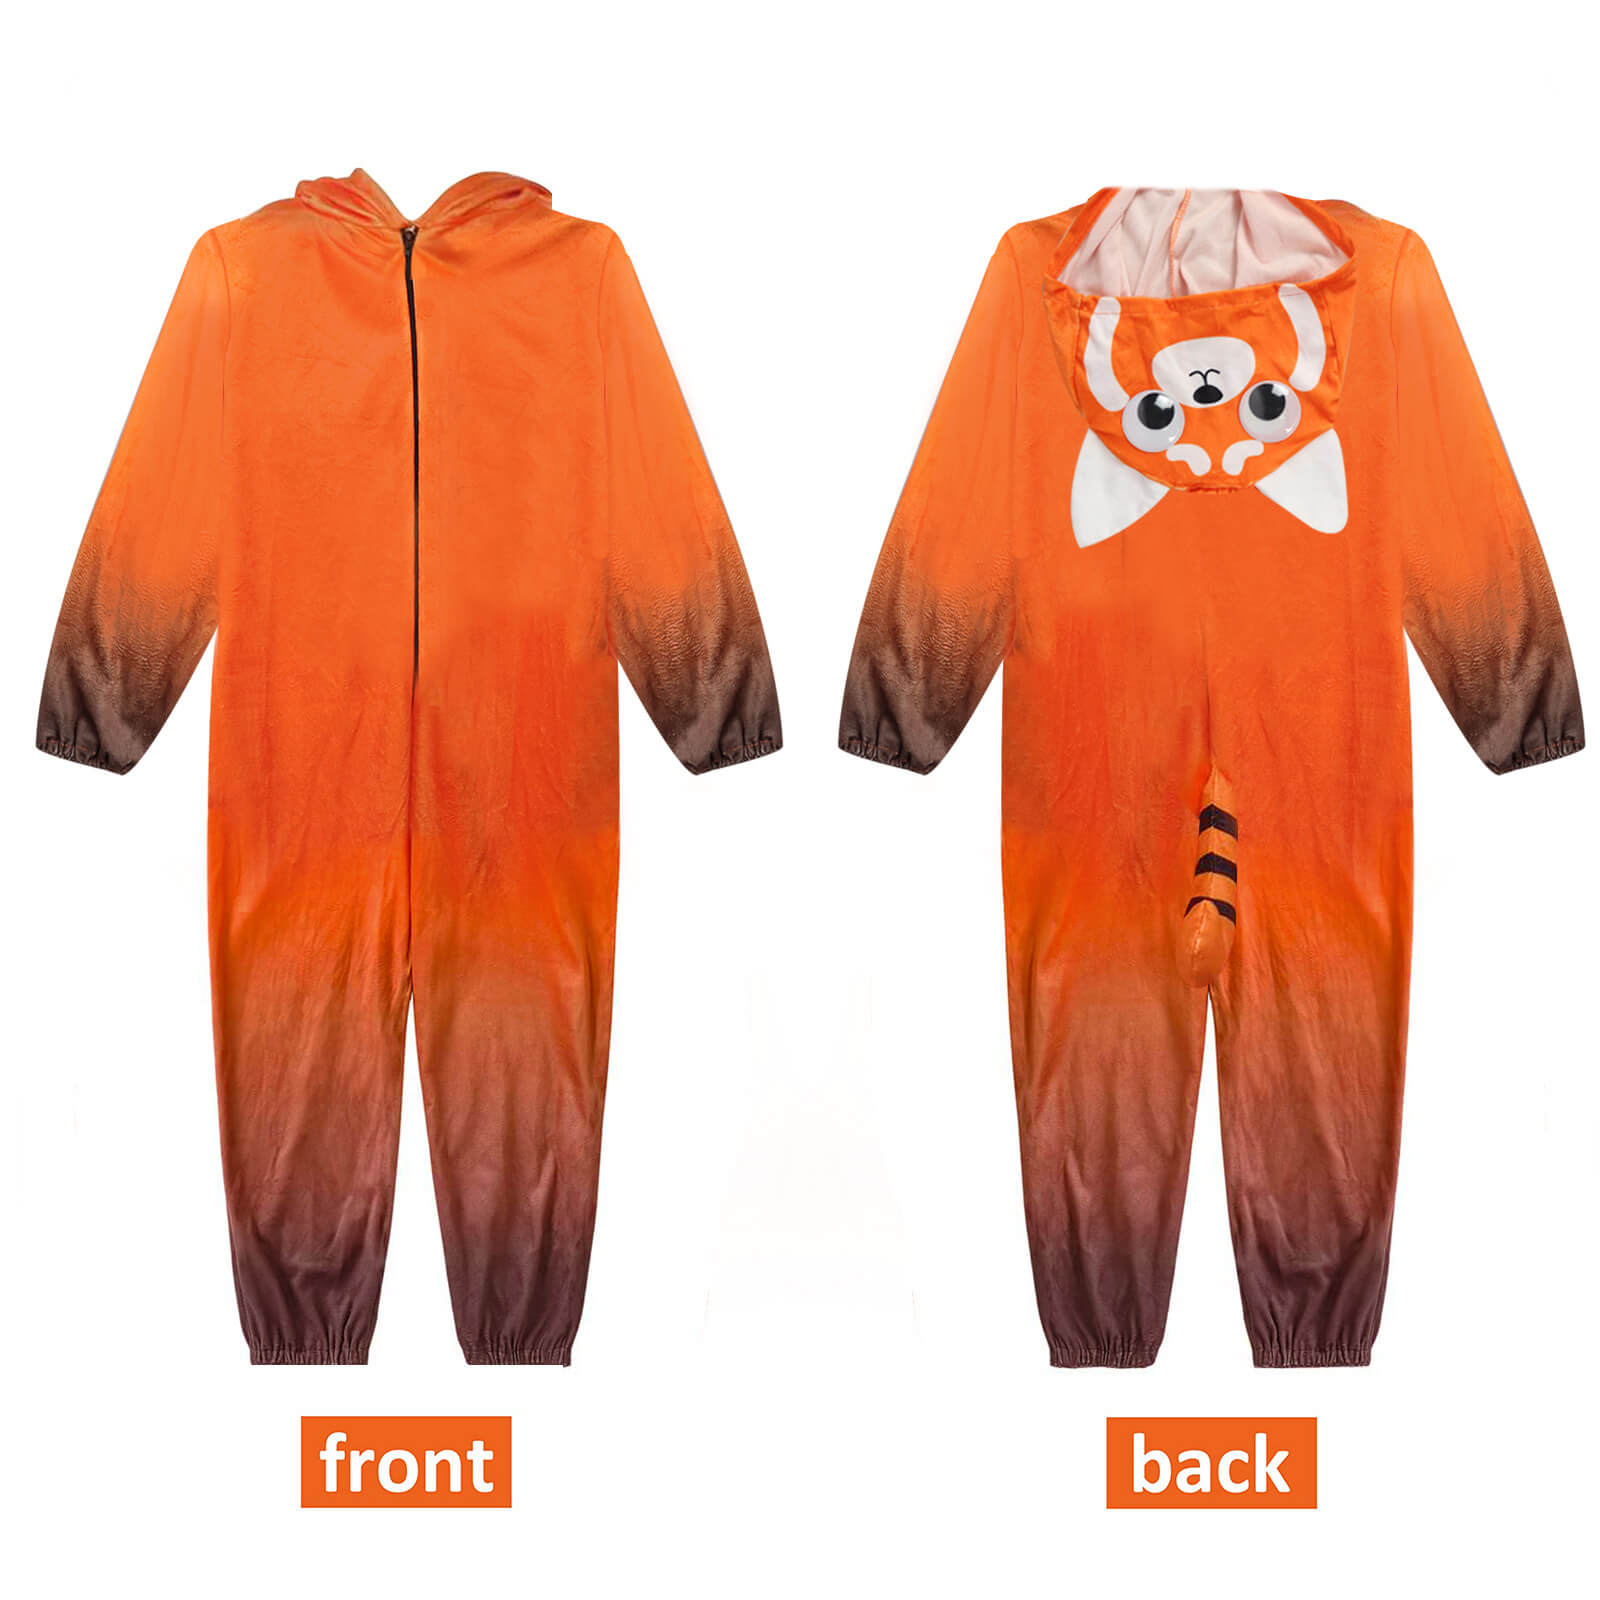 Kids Turning Red Mei Cosplay Costume Meilin Jumpsuit Halloween Red Panda Onesie for Boys and Girls